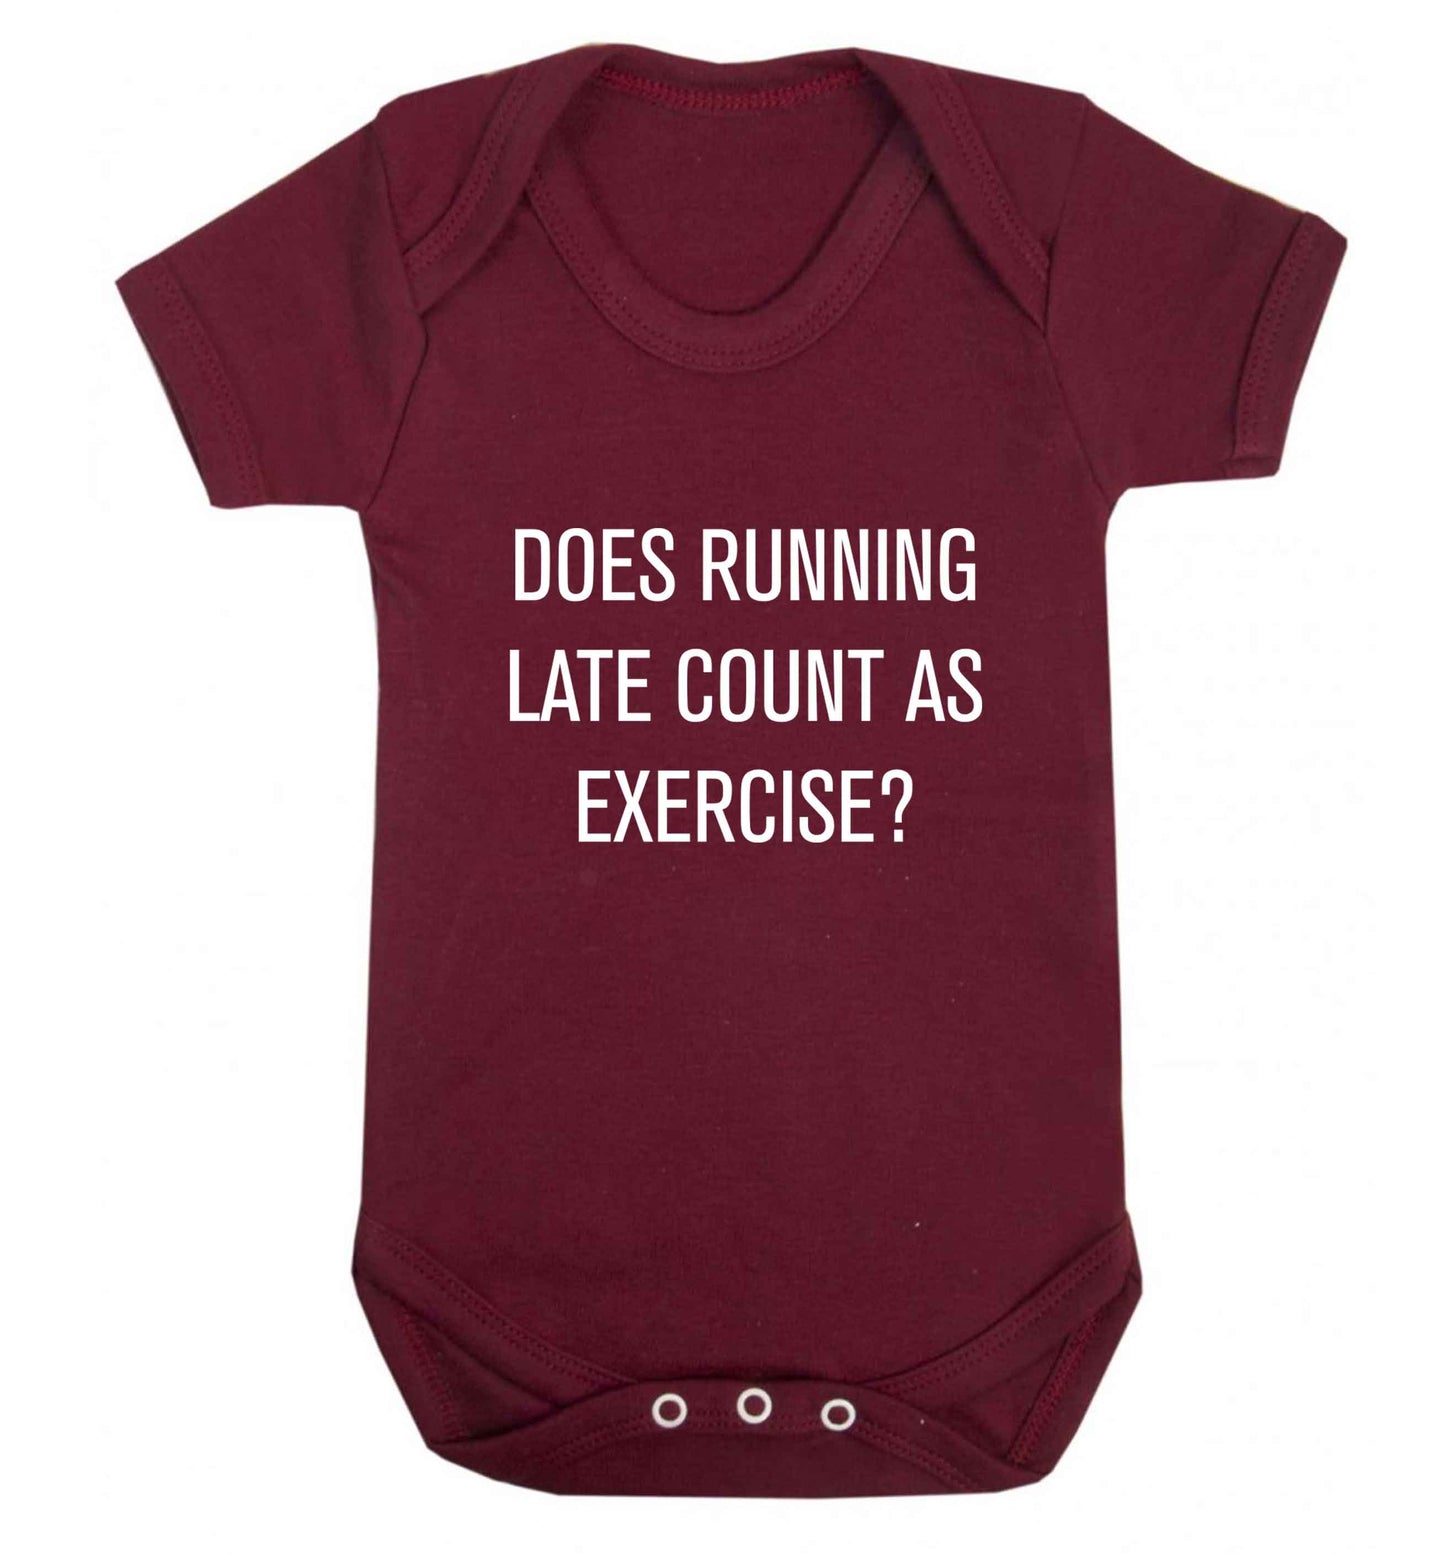 Does running late count as exercise? baby vest maroon 18-24 months